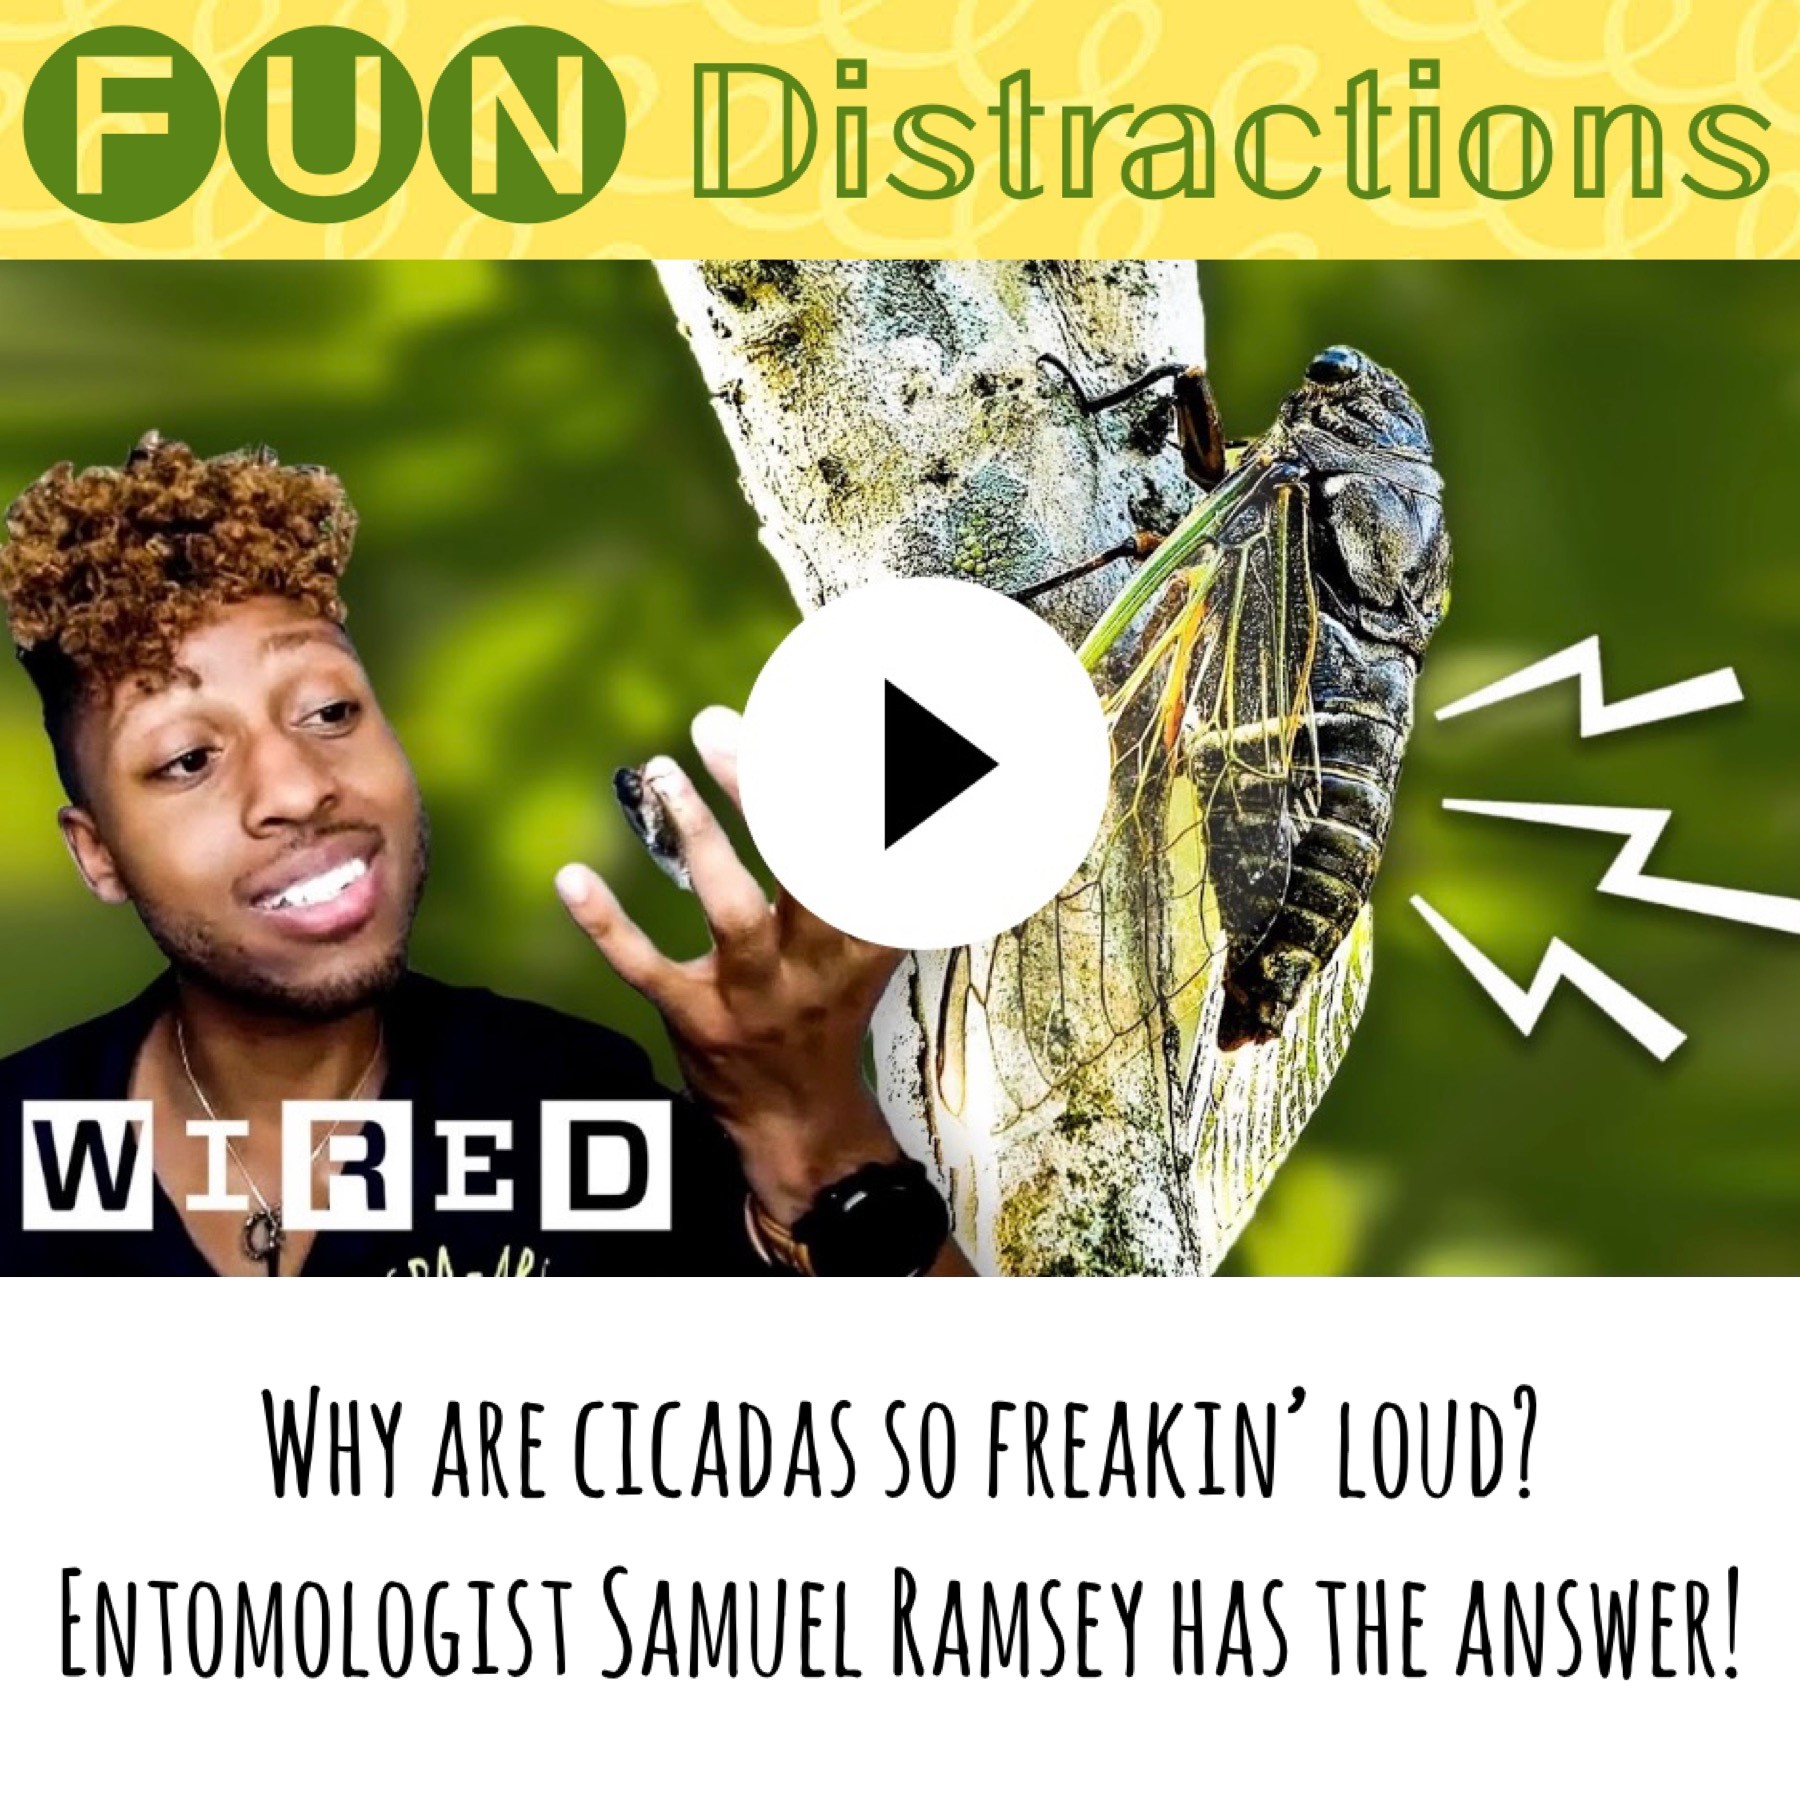 Image advertising the Library’s FUN Distractions series post on cicadas with Dr. Sammy the Entomologist